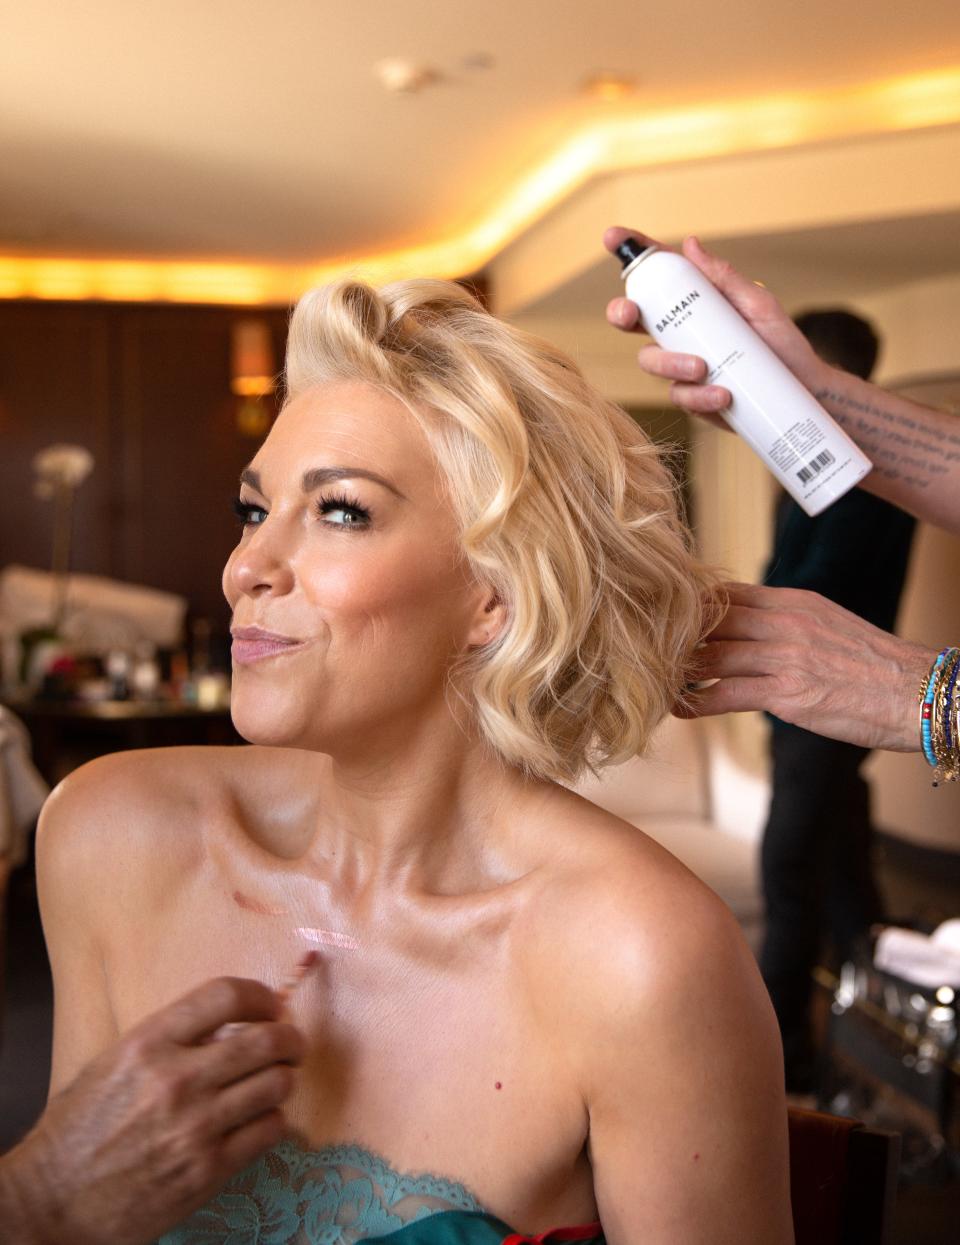 Makeup artist Stephen Sollitto used products from Tower 28 Beauty, Rare Beauty, Charlotte Tilbury, Iconic London, Anastasia Beverly Hills, Buxom Cosmetics, and Subtle Energies, while Richard Collins styled Waddingham’s blonde locks with Balmain products.